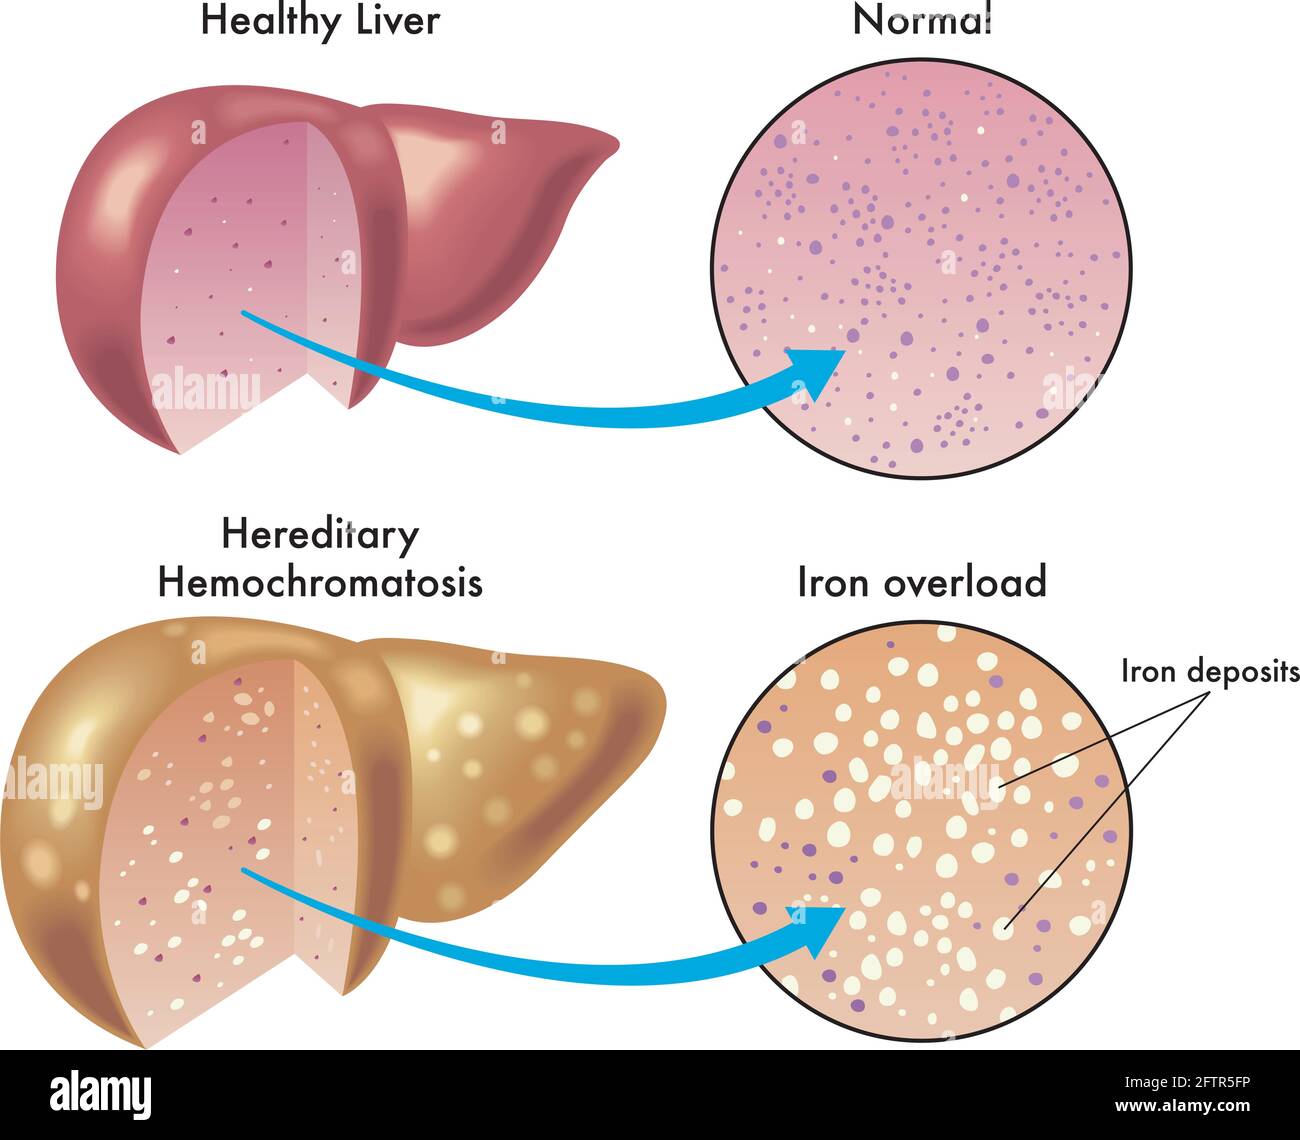 Medical illustration shows the difference between a healthy liver and one with hereditary hemochromatosis, with enlarged details and annotations. Stock Vector